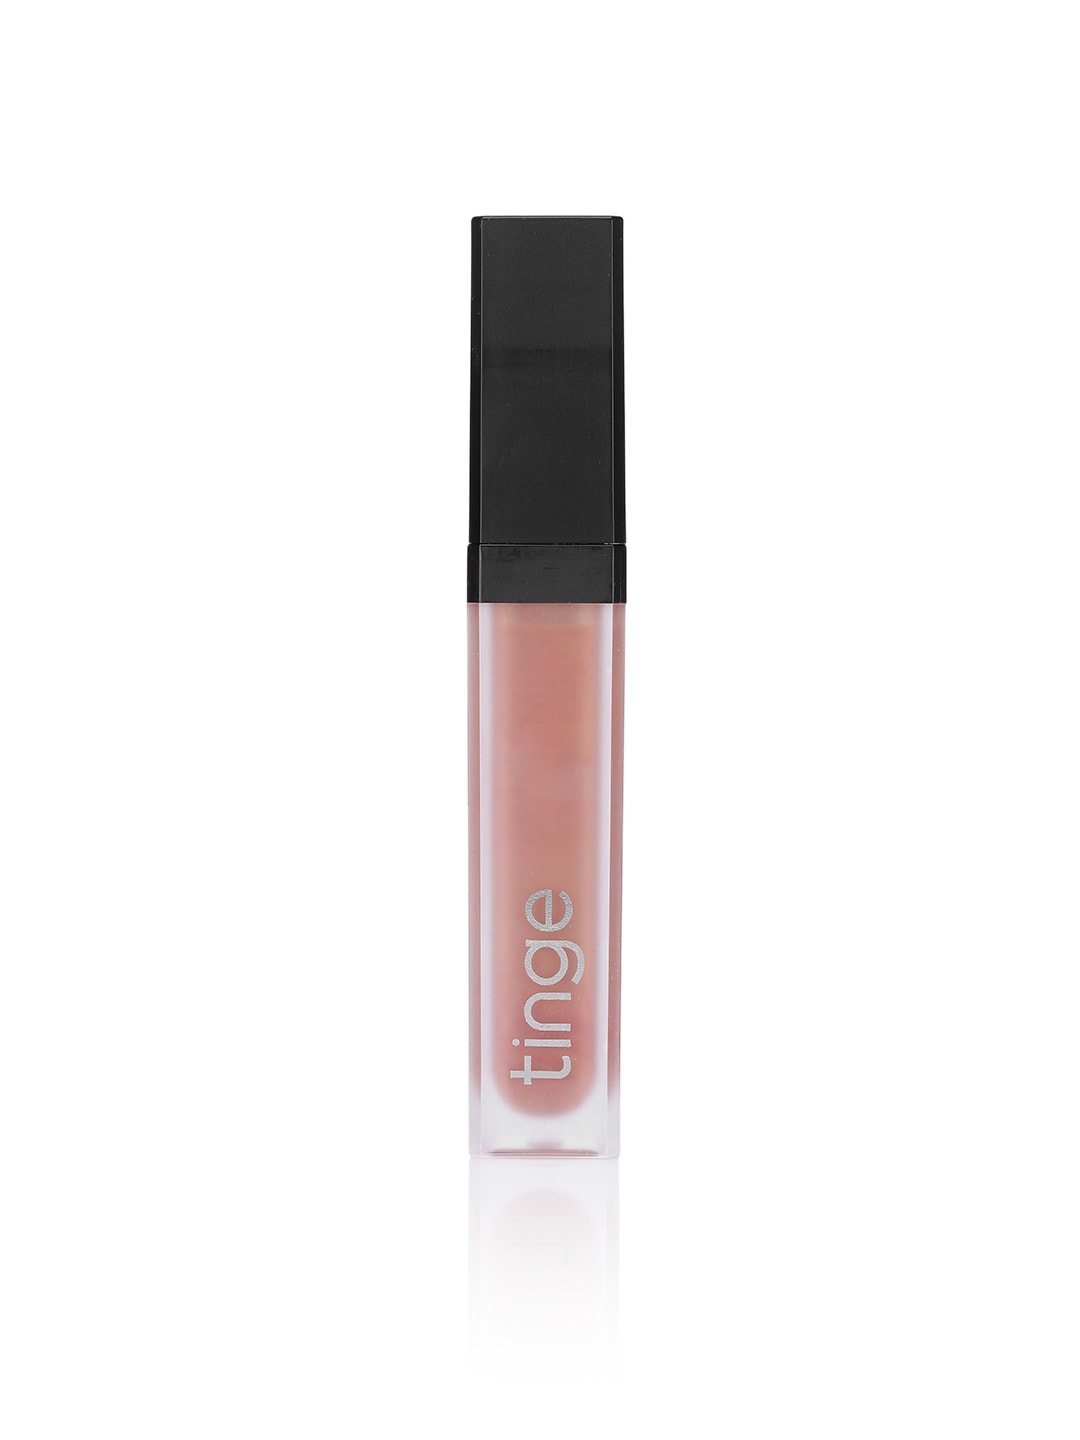 tinge Liquid Matte Lipstick Devoted Nude Pink For Moisturizing Effect Price in India